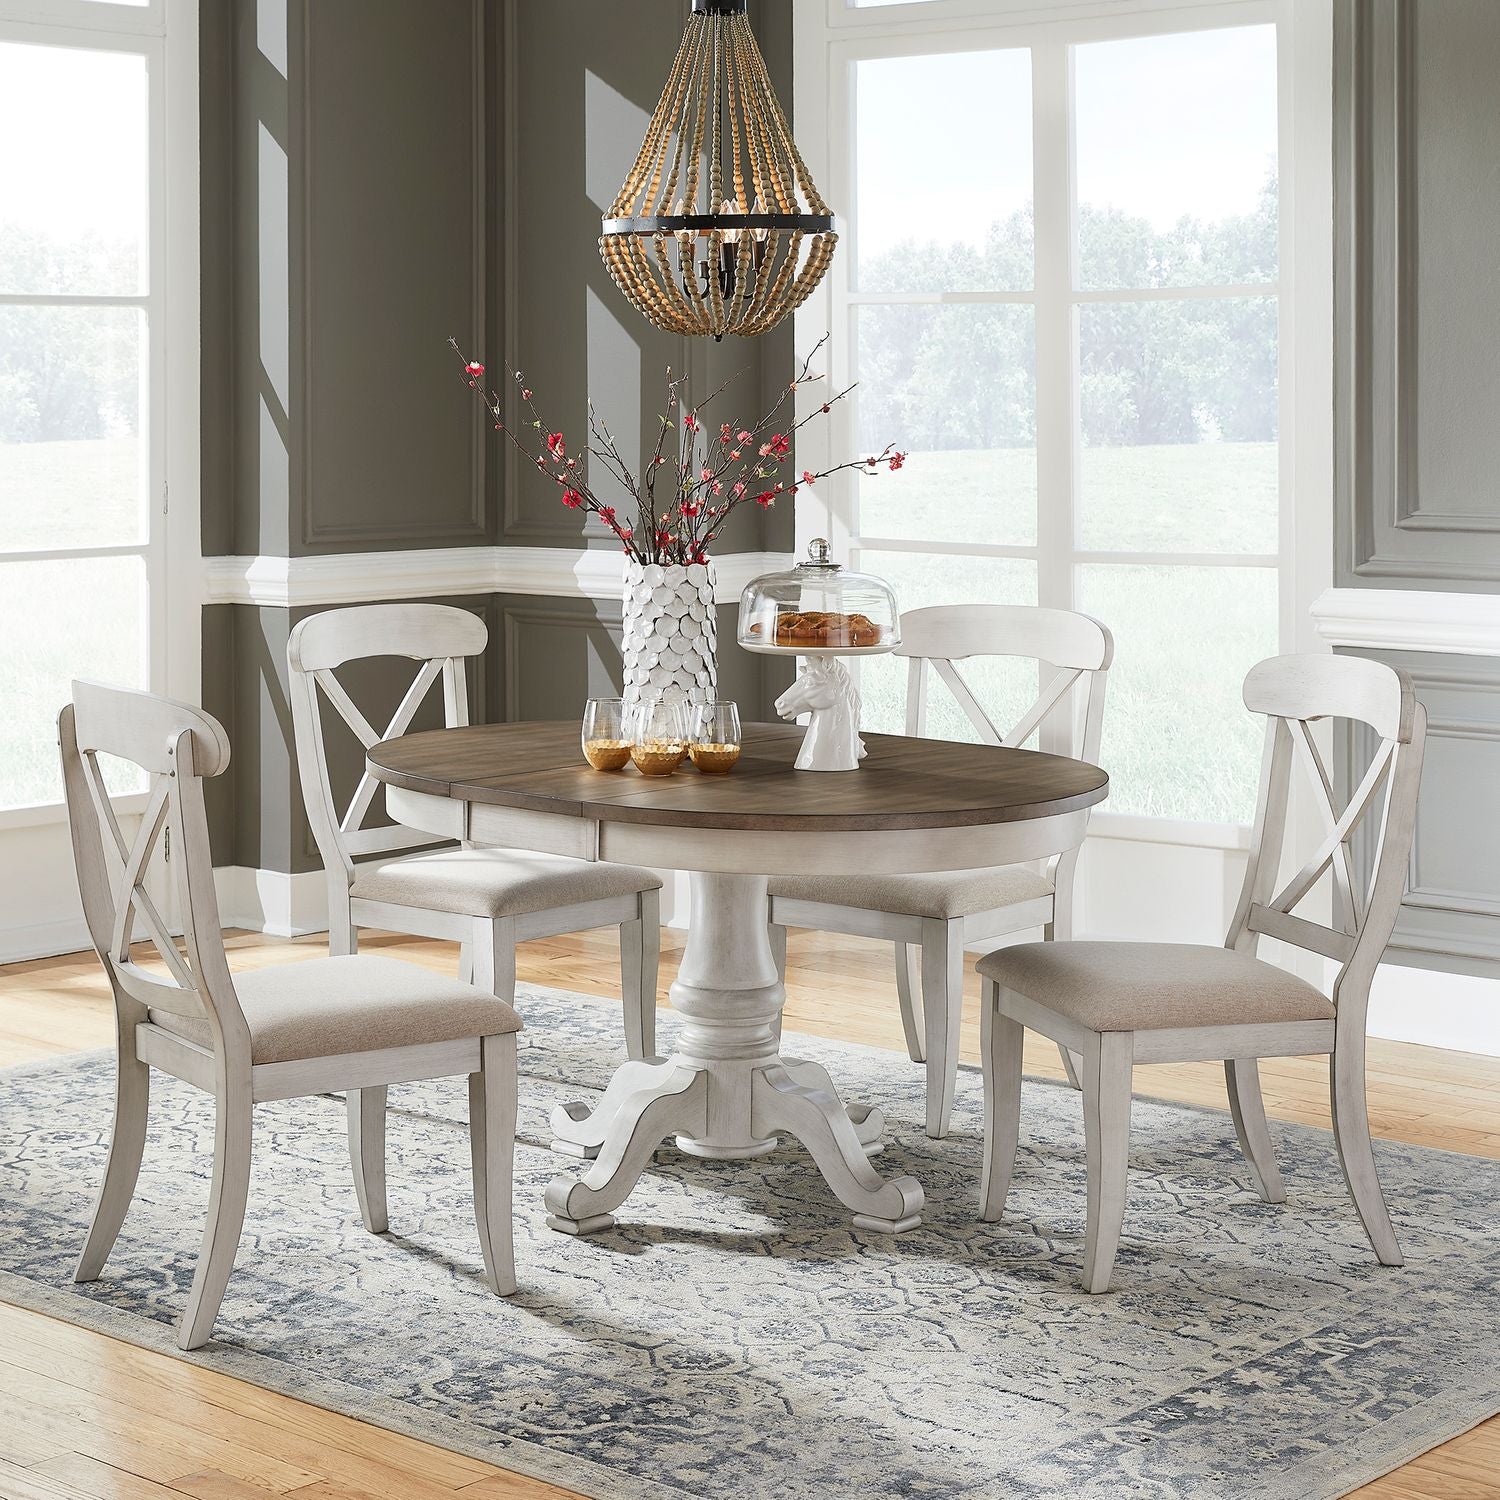 Ocean Isle / 5 Piece Pedestal Table Set by Liberty Furniture